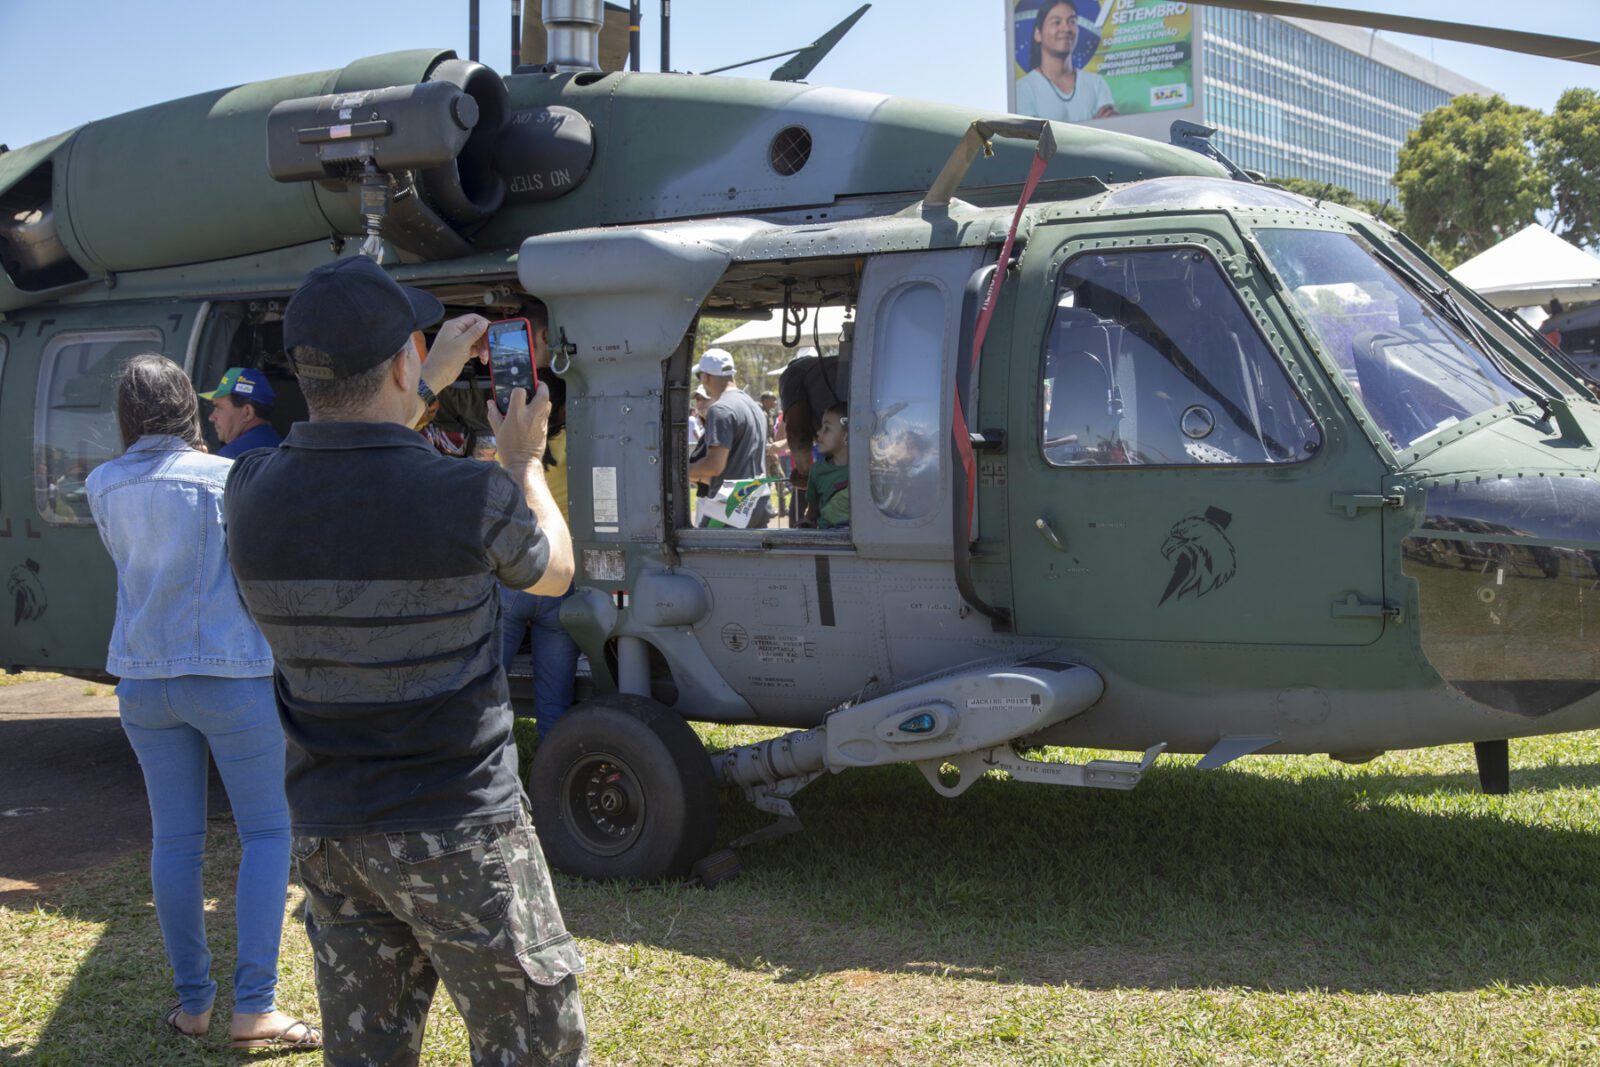 FAB presents several attractions at the Armed Forces Expo in Brasilia